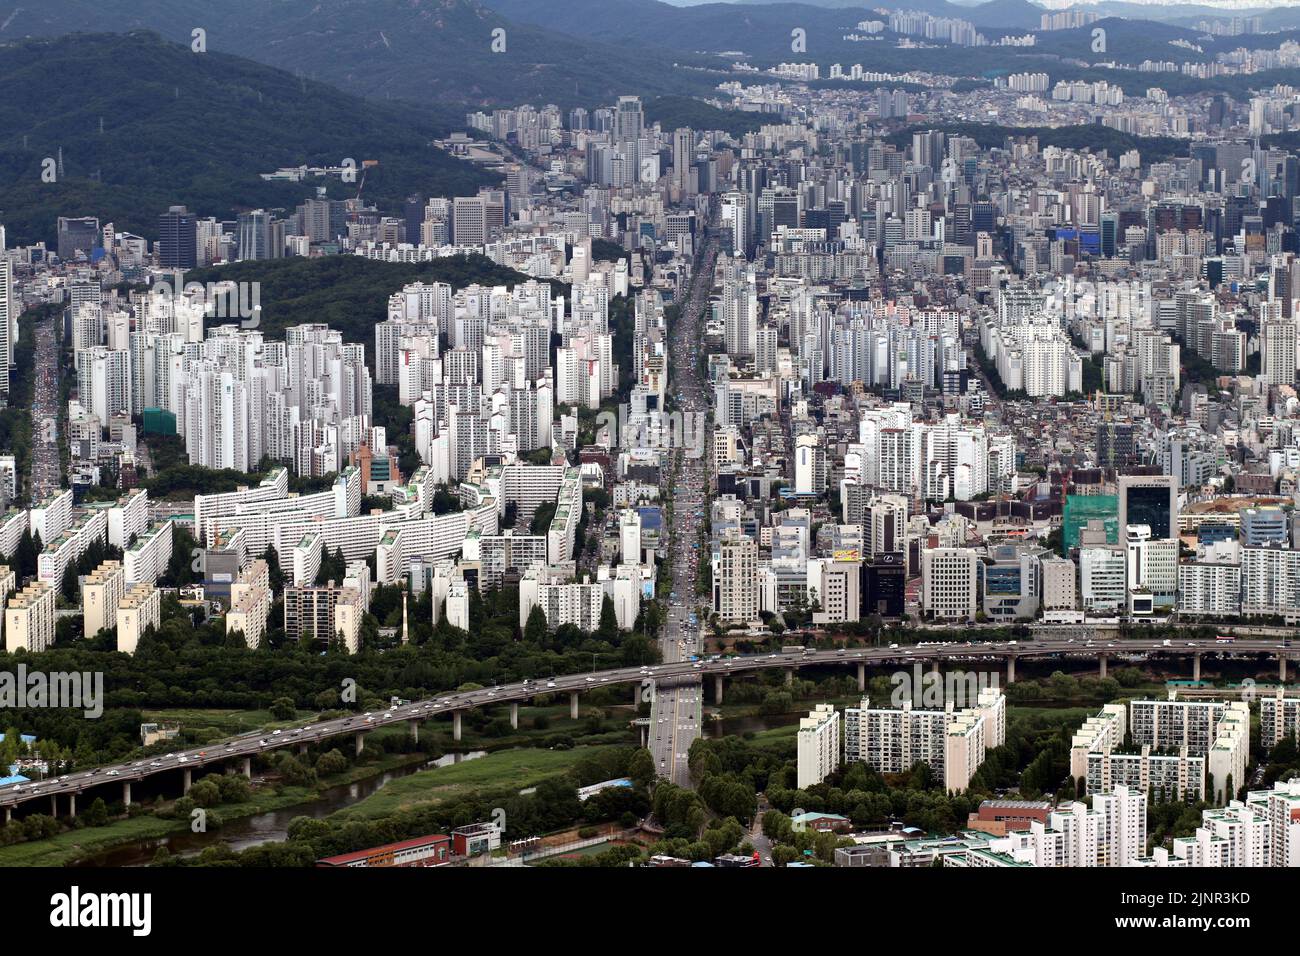 Seoul City Scape From The Lotte World Tower Stock Photo